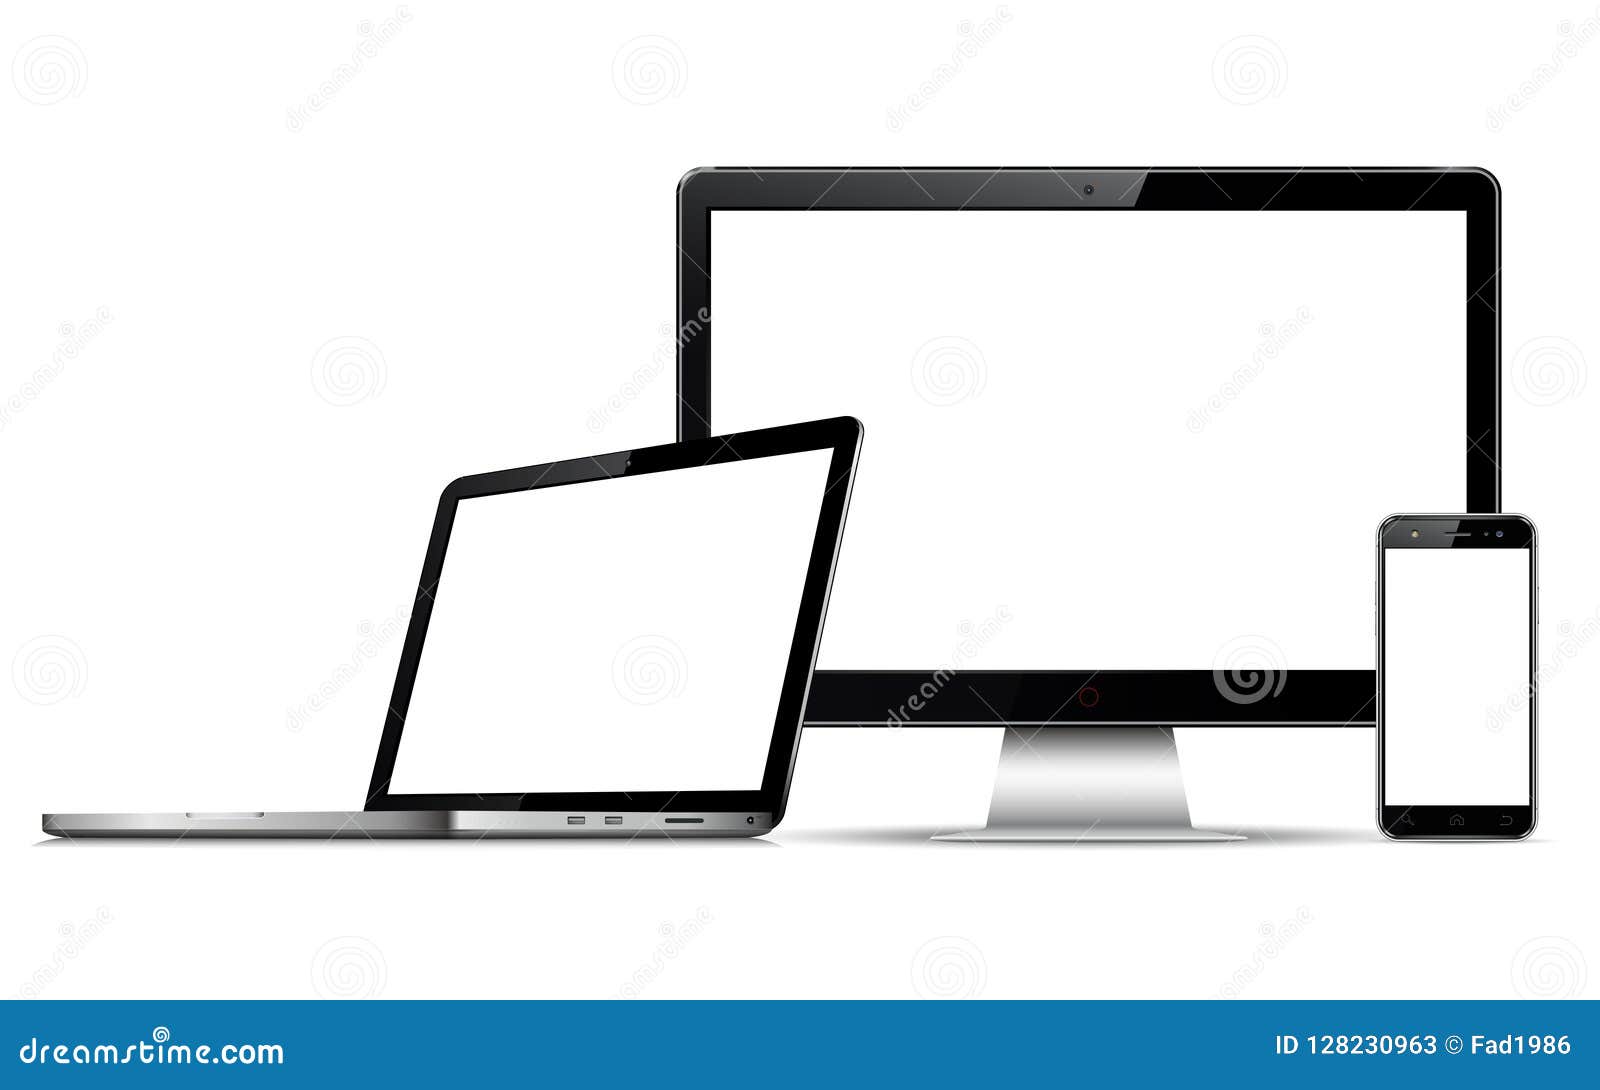 computer monitor, laptop and mobile phone with blank screen